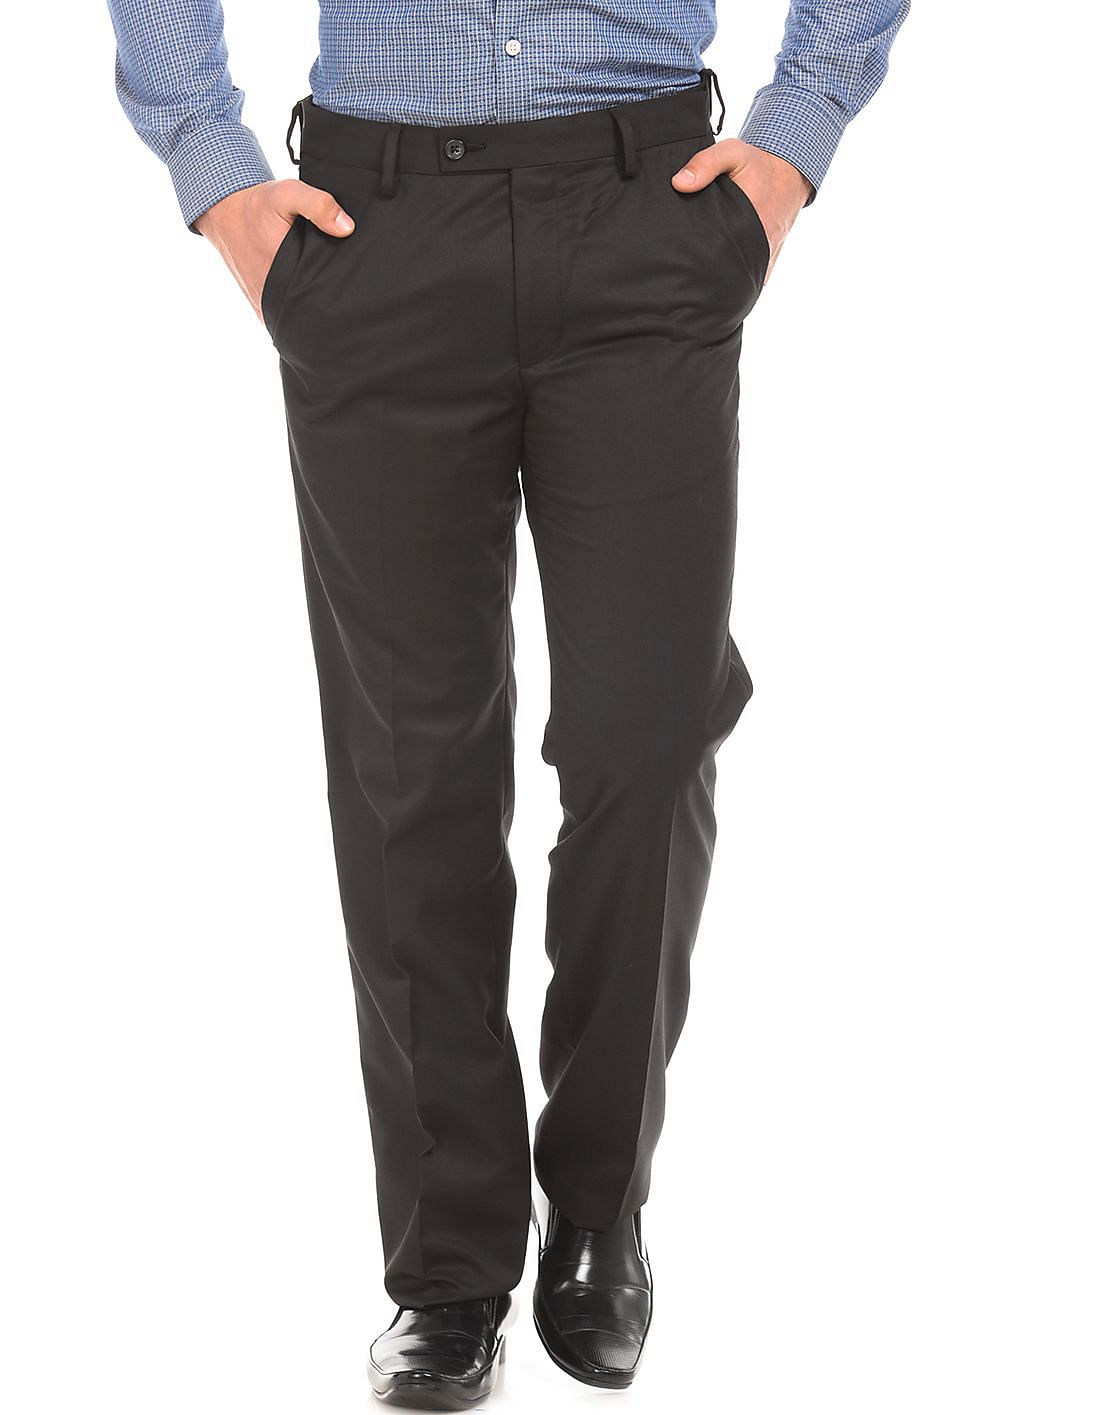 Buy Arrow Solid Regular Fit Trousers - NNNOW.com